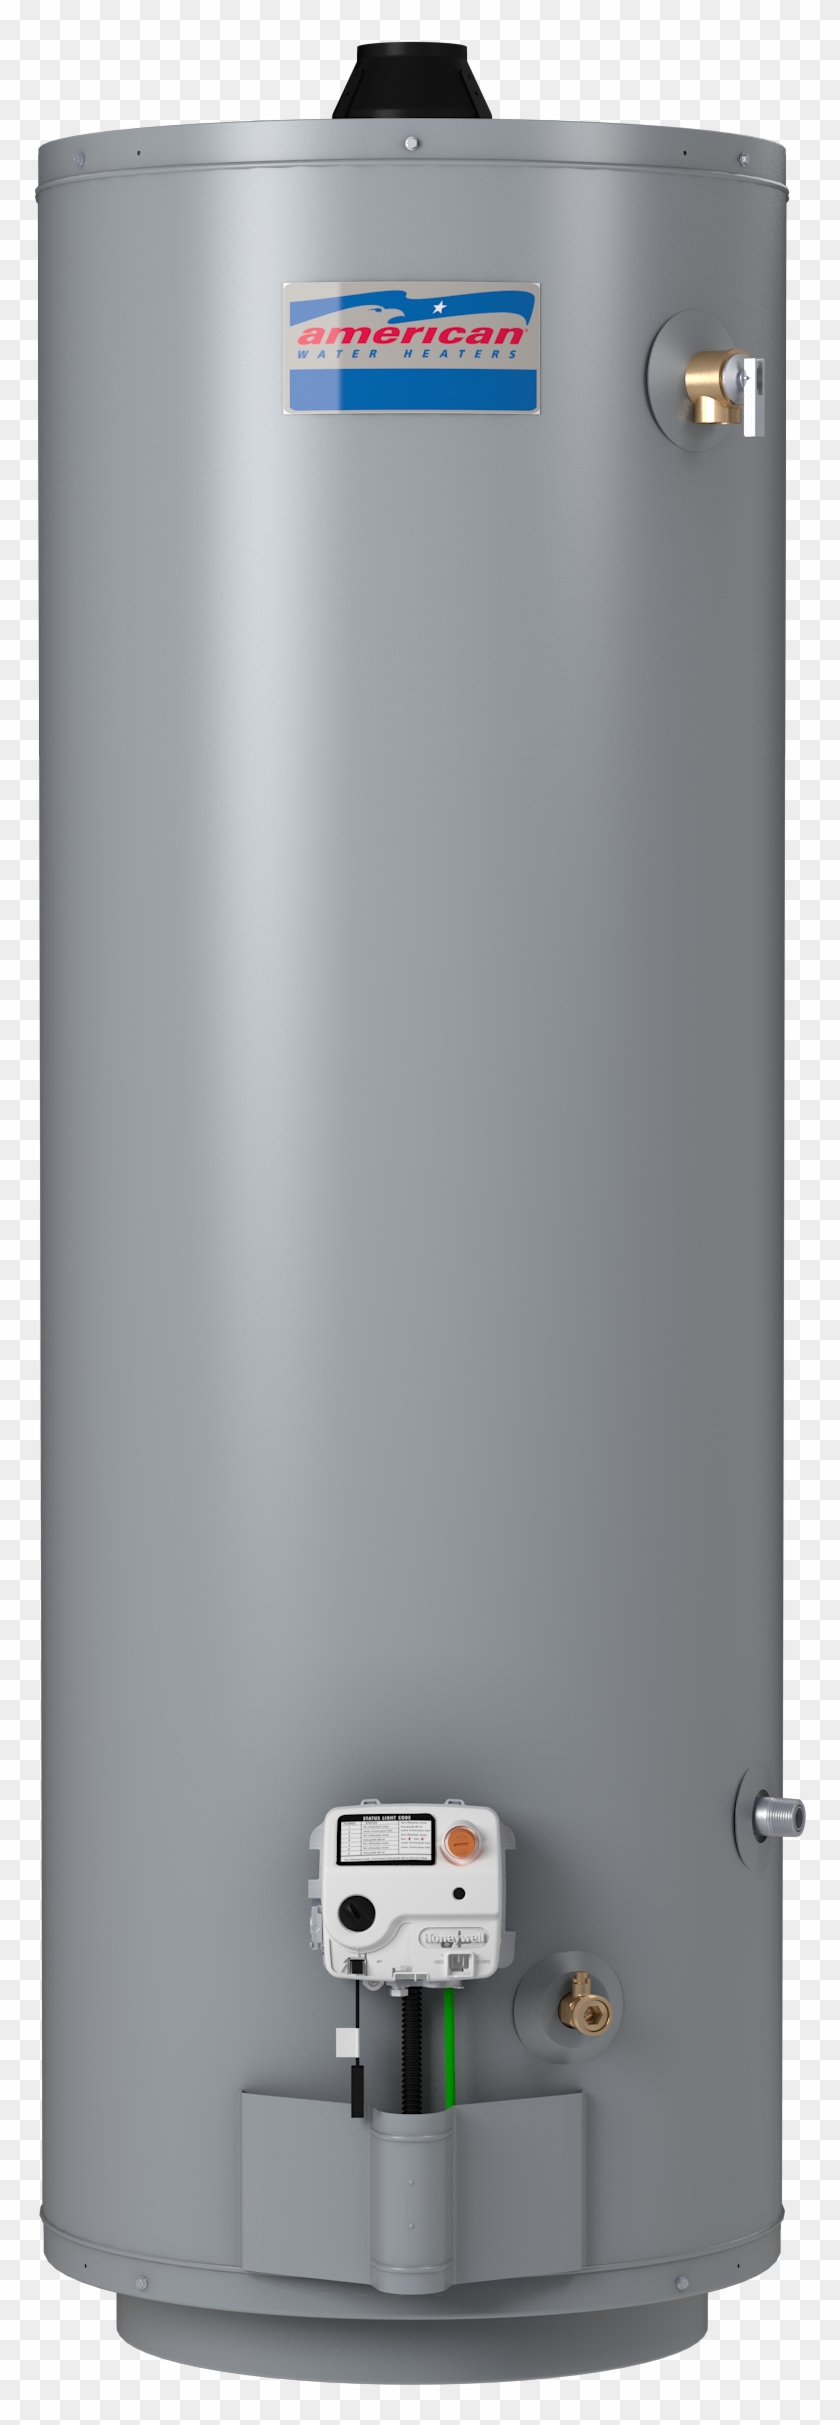 Png - Water Cooler Clipart